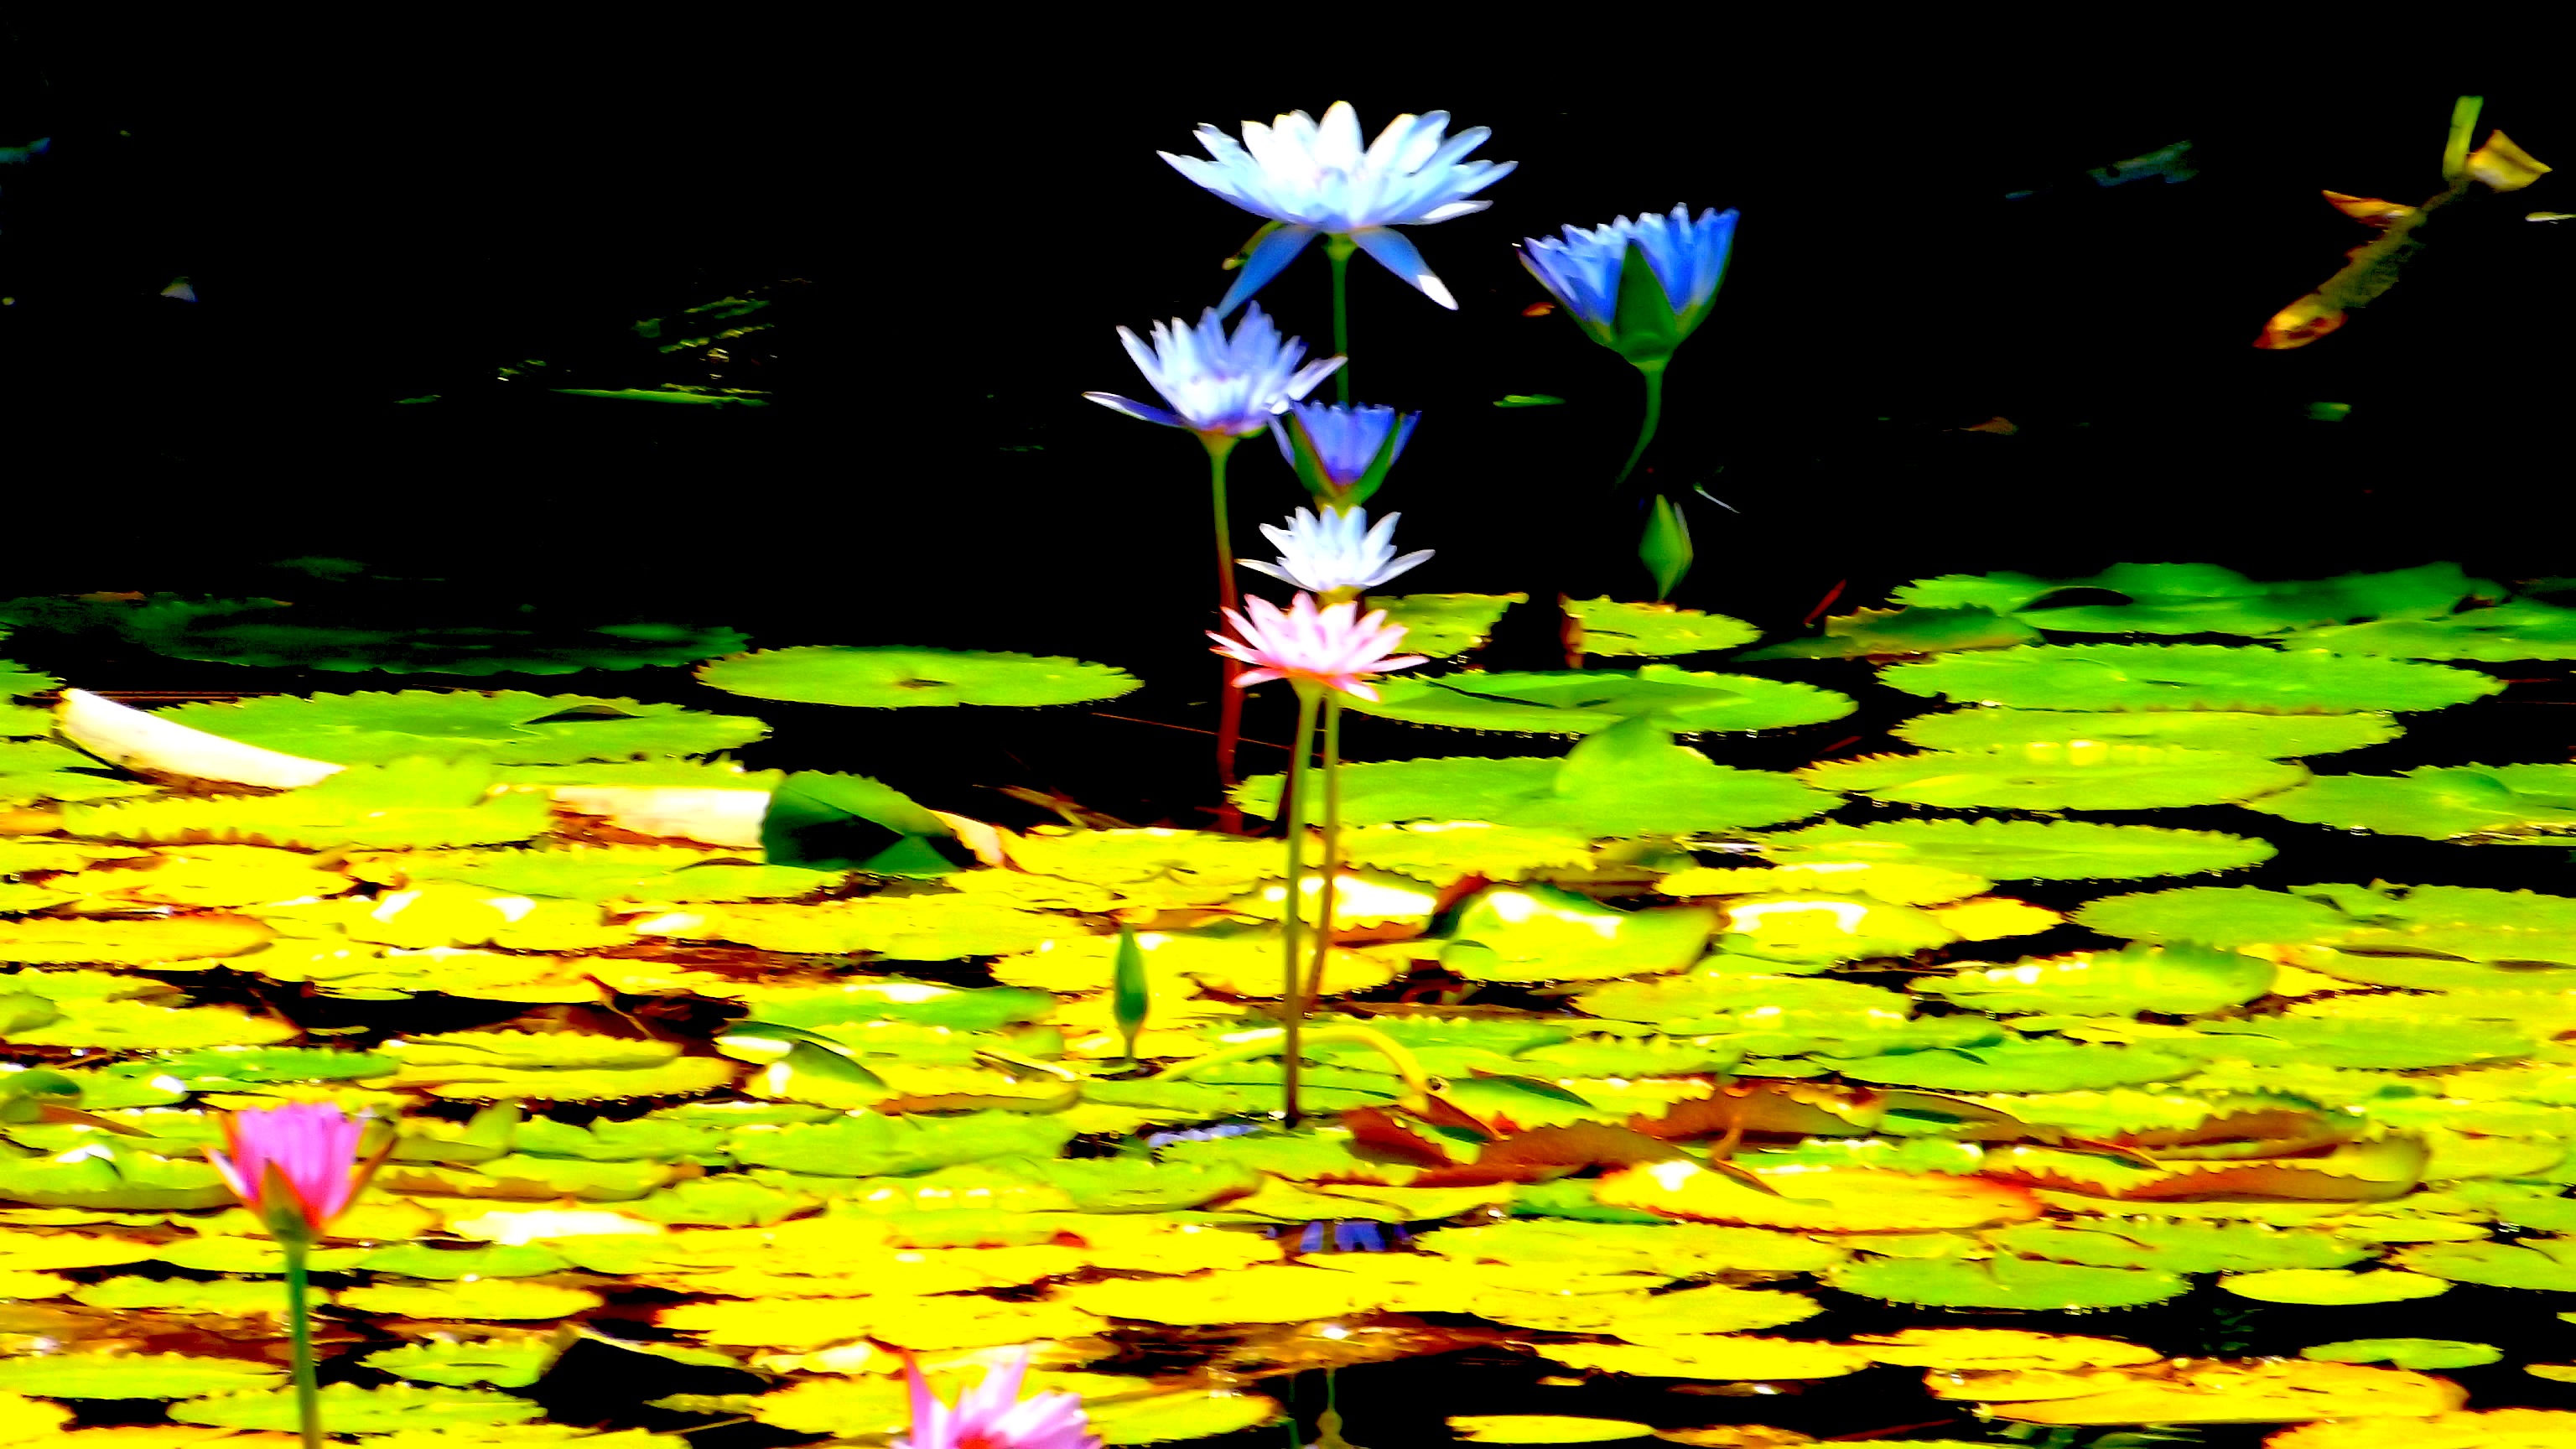 =======================================COLORFUL LILY PADS===============================================================================================COLORFUL LILY PADS================